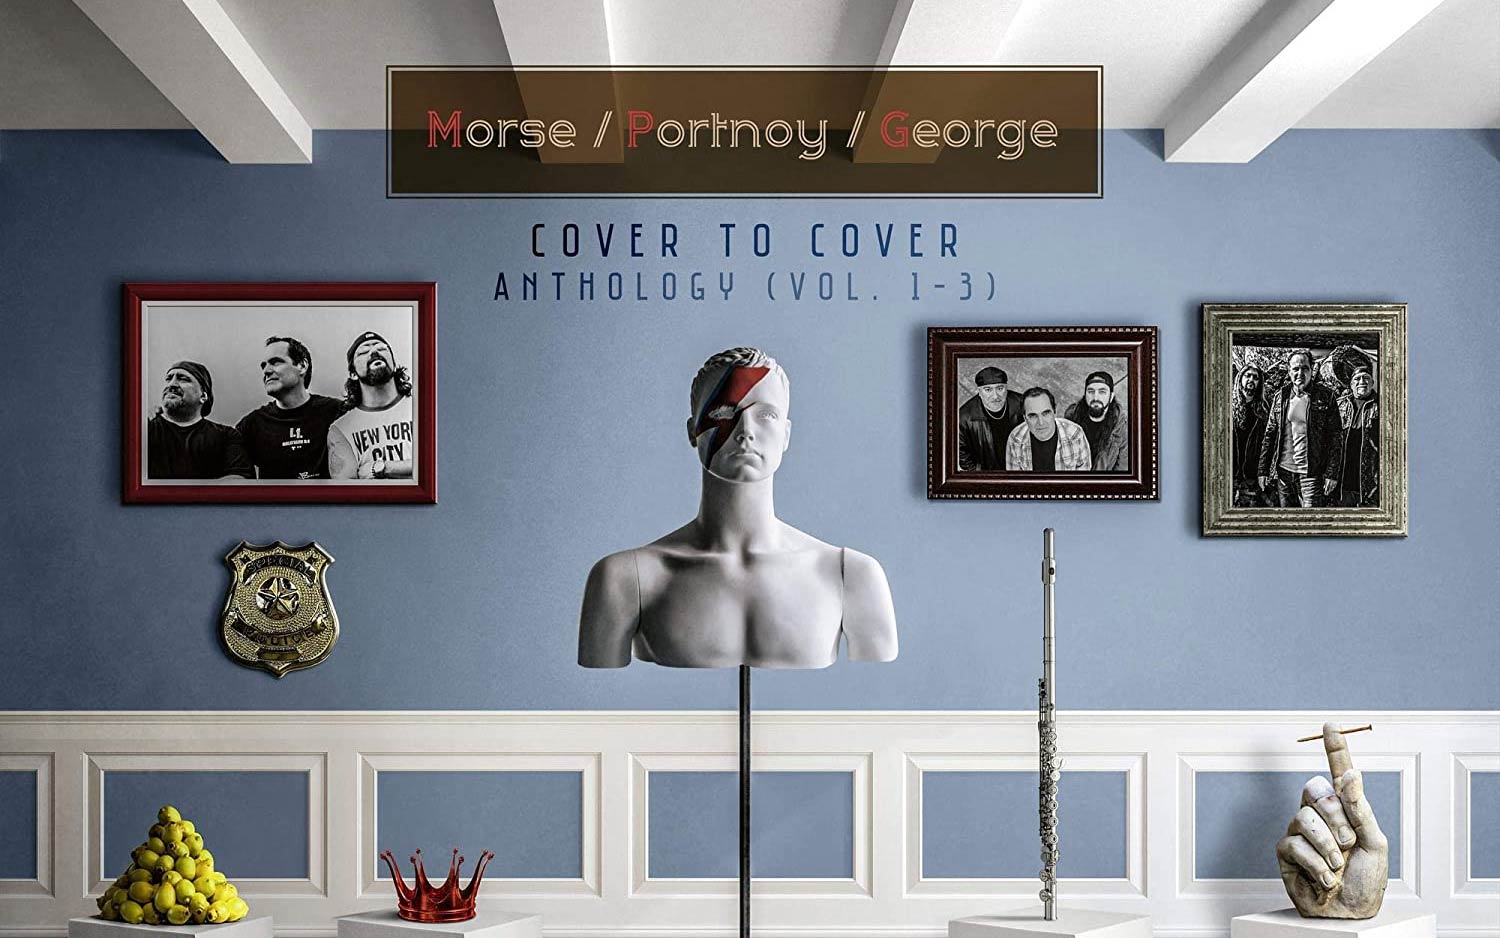 Morse-Portnoy-George: Cover to Cover Anthology Vol.1-2-3 // Inside Out Music